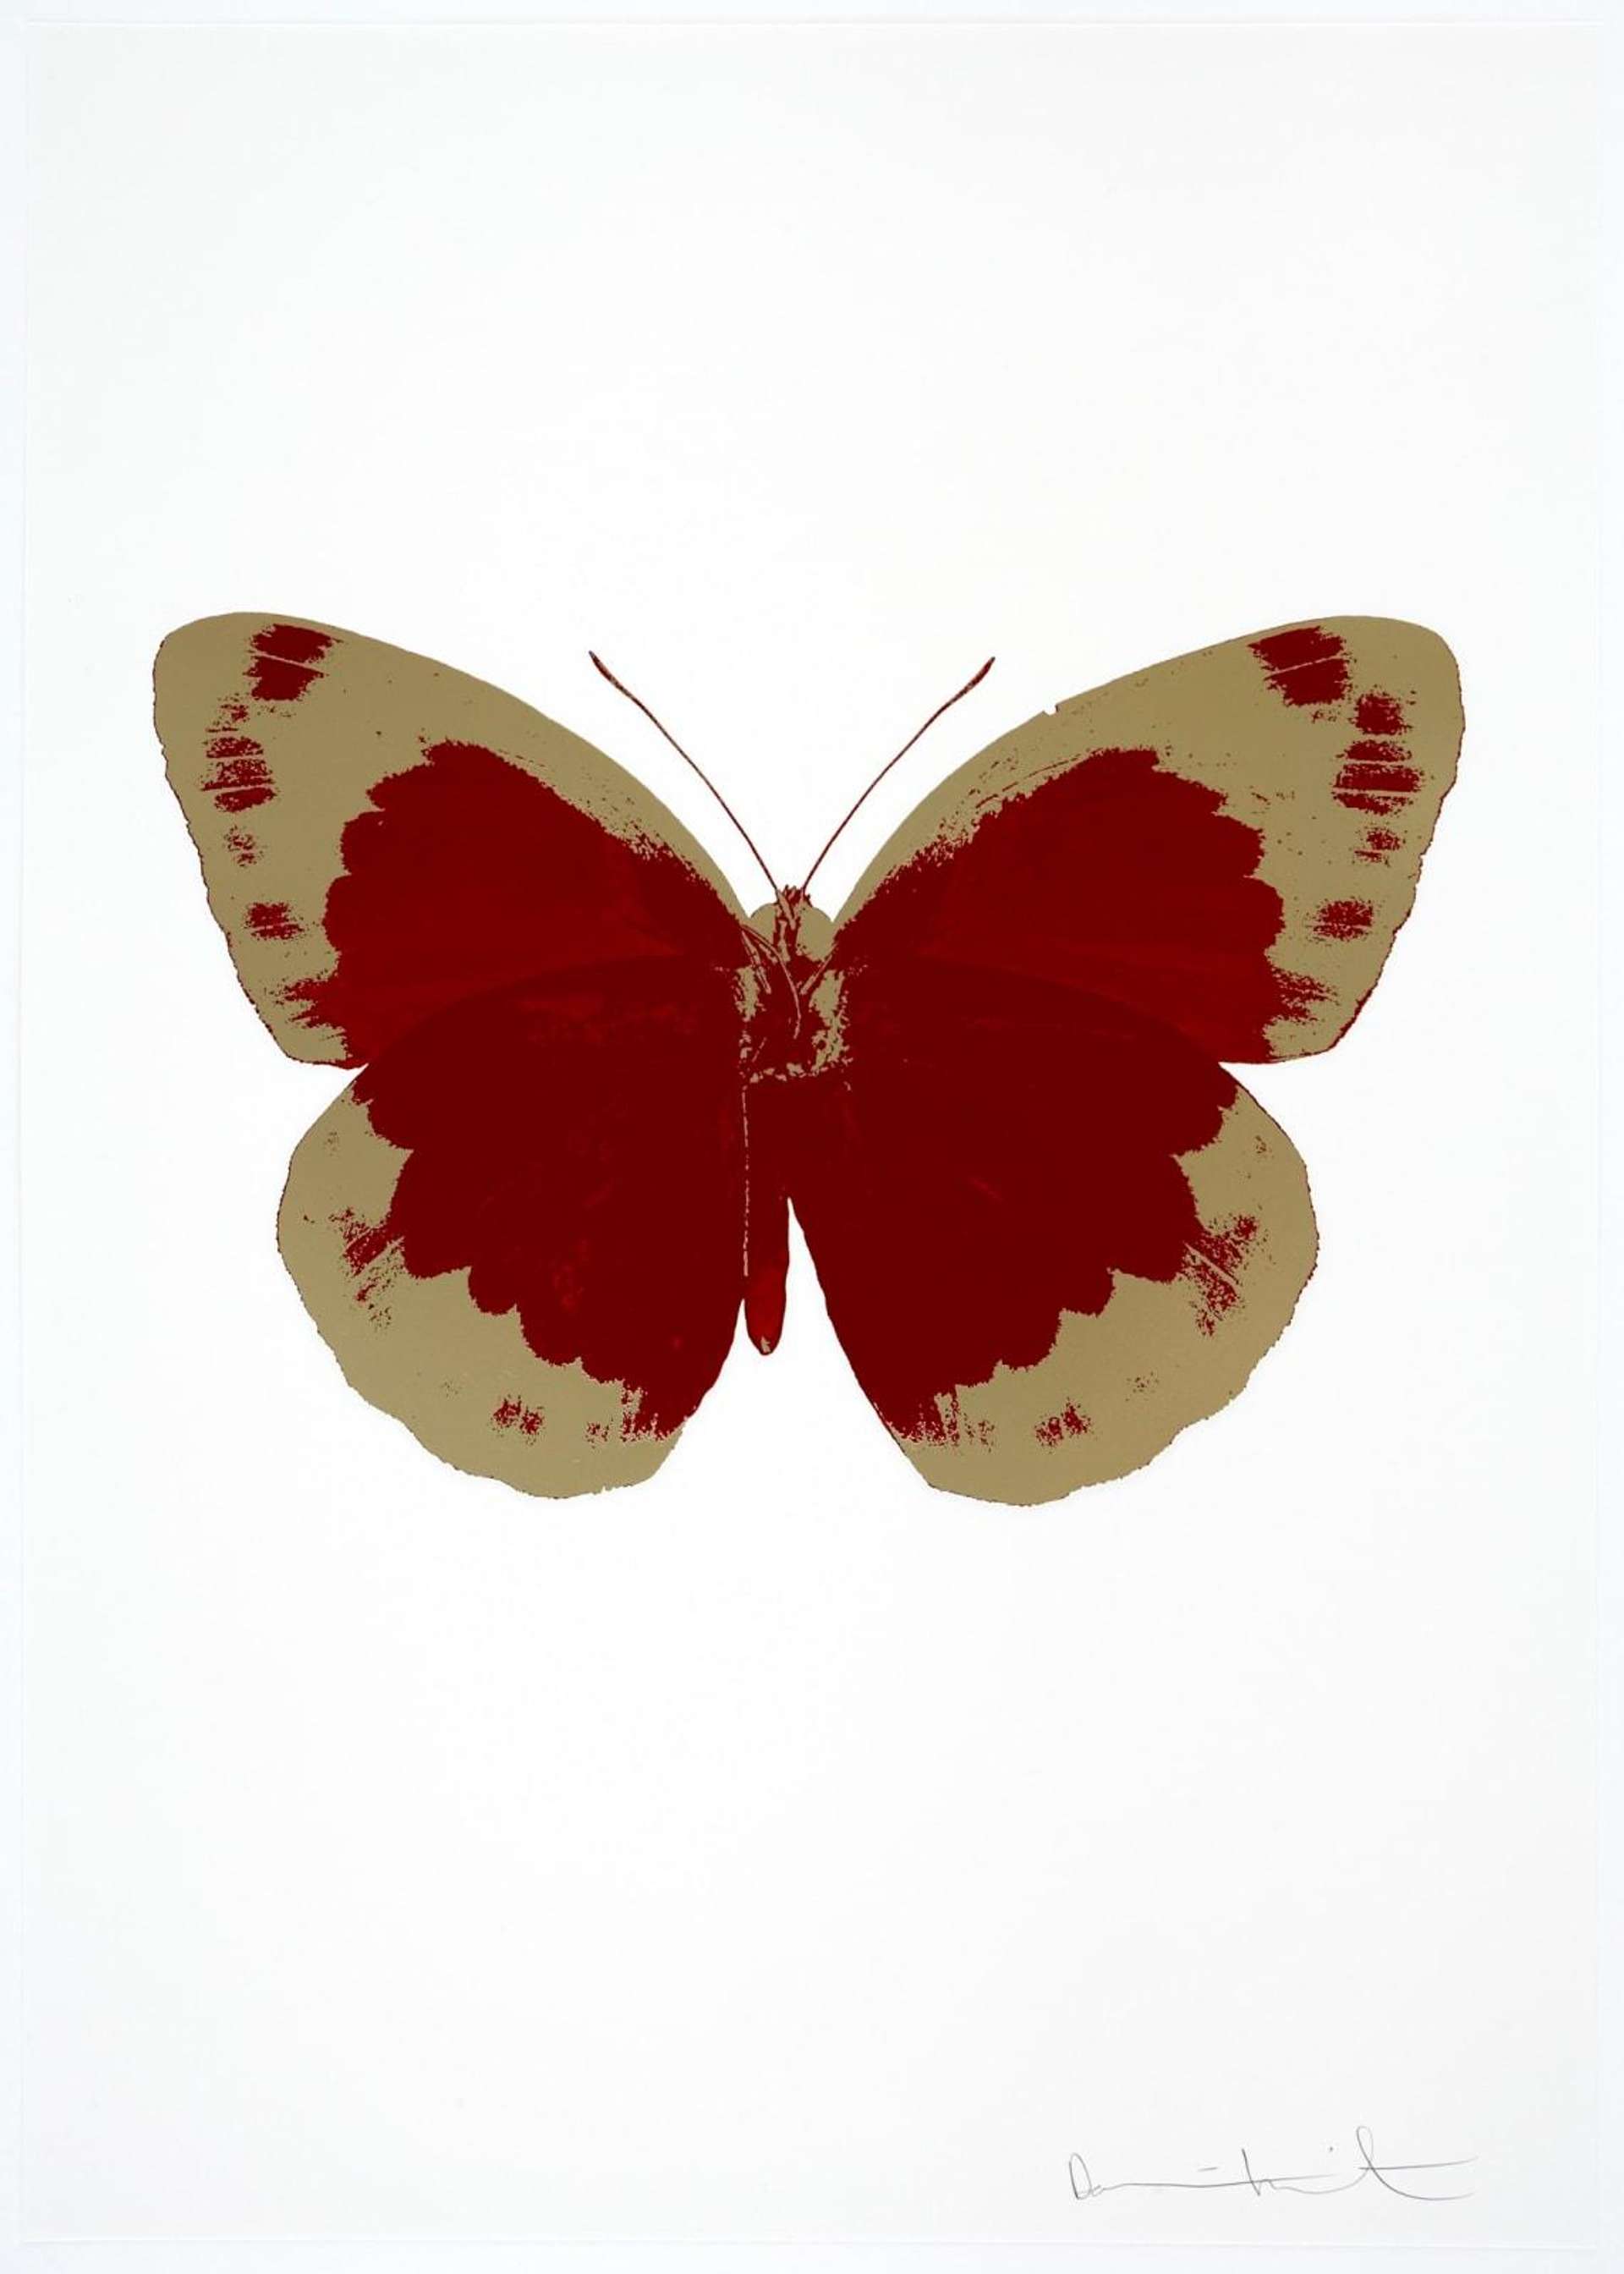 Damien Hirst: The Souls II (chilli red, cool gold) - Signed Print